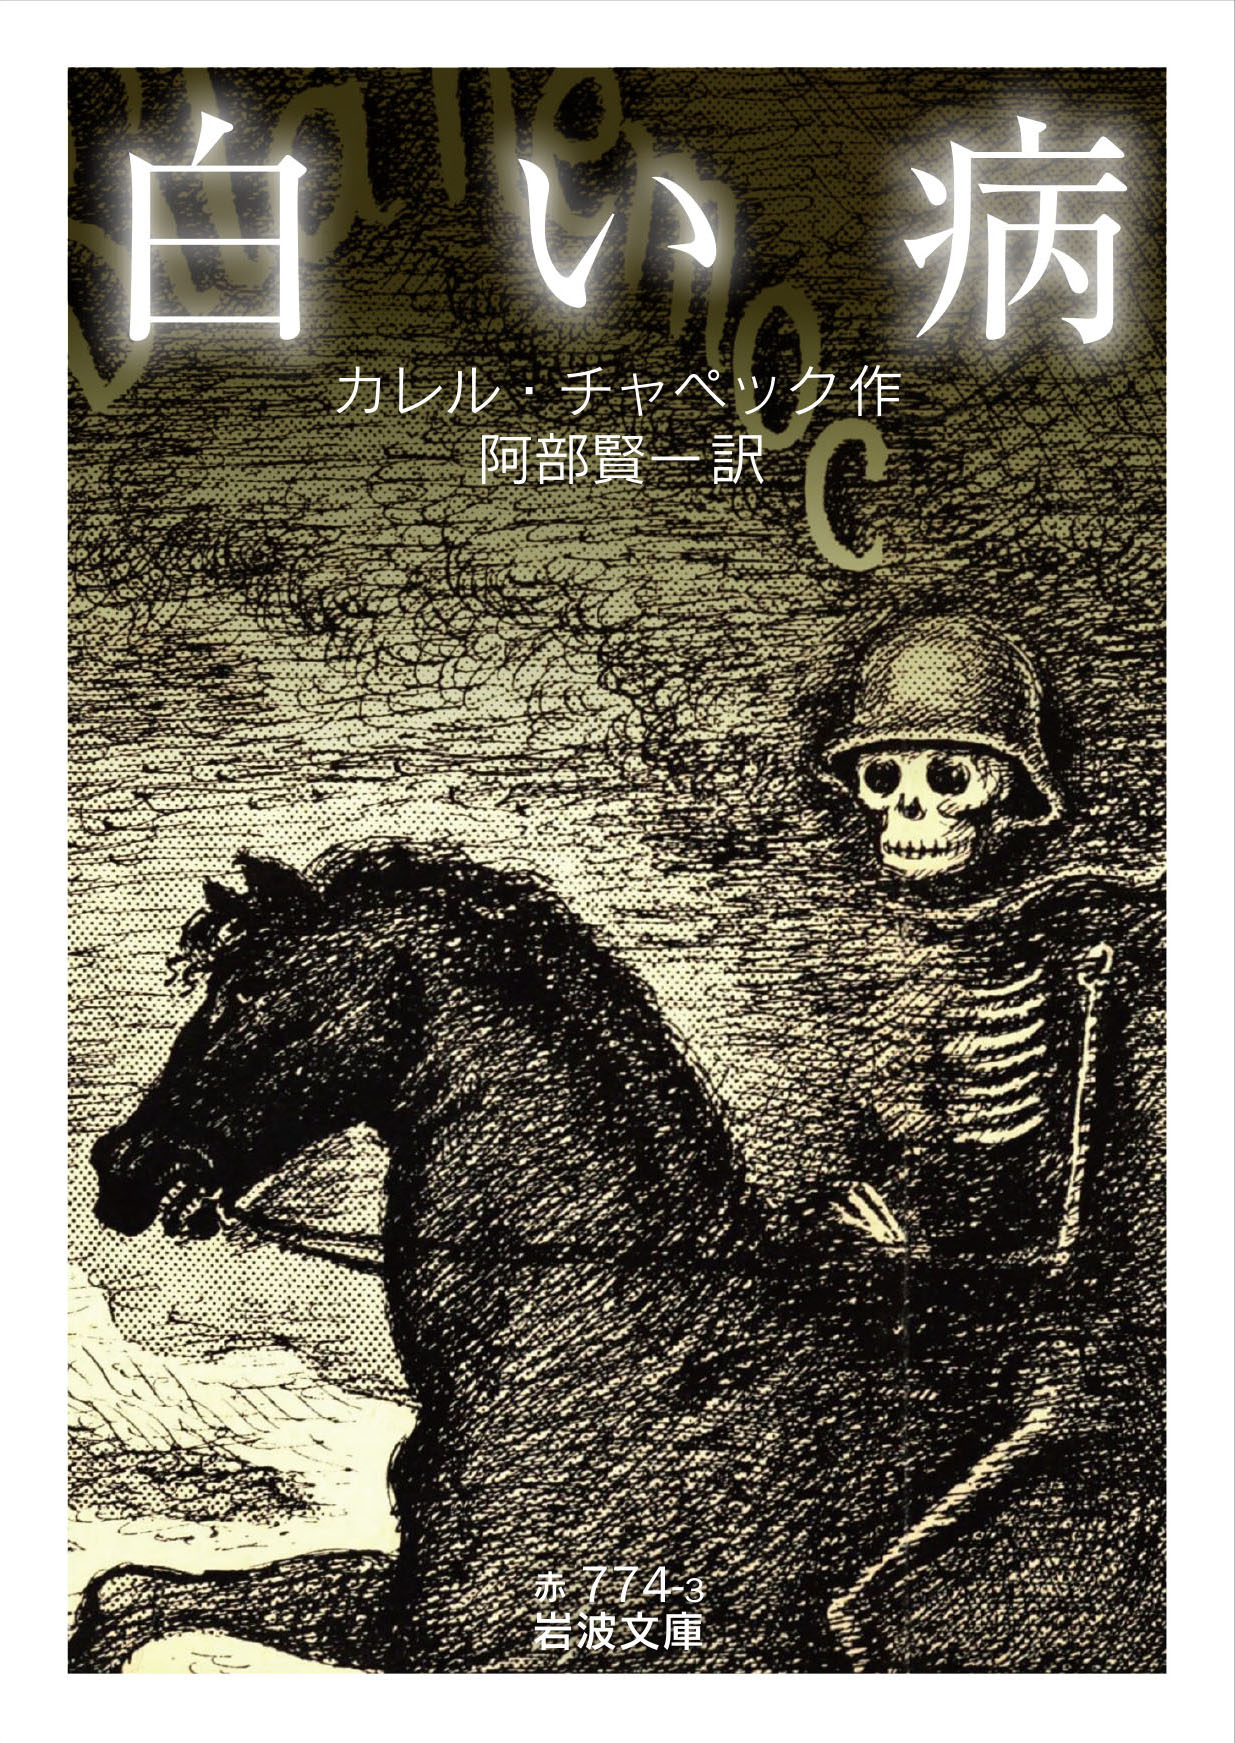 a picture of a skeleton riding on a horse